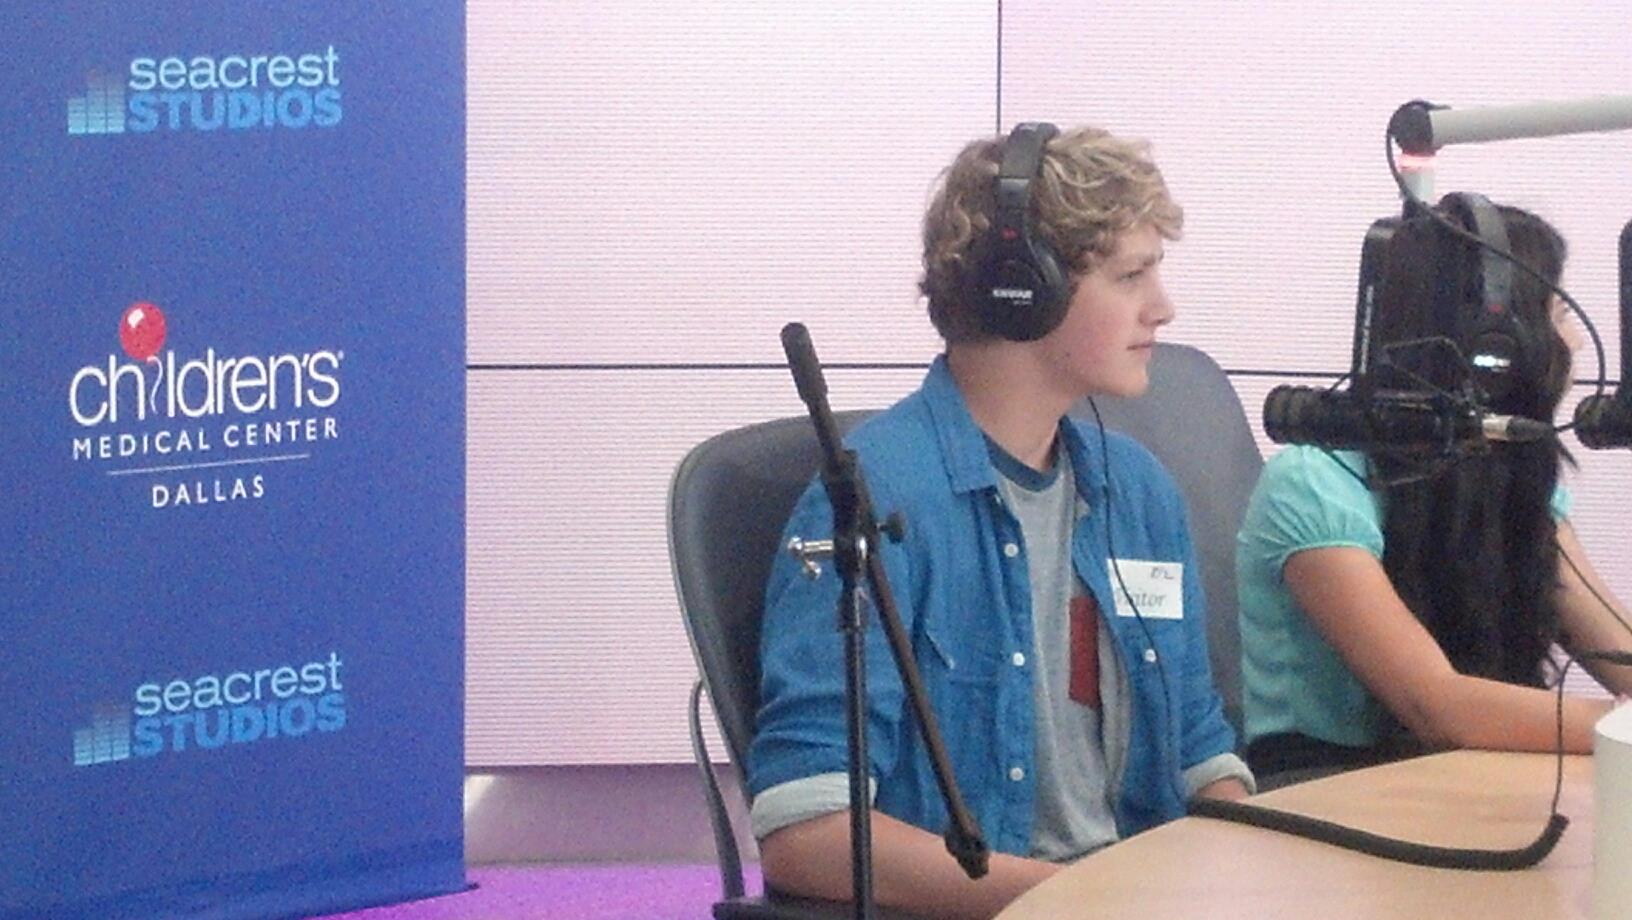 Steffan Argus recording a live radio show at the the Ryan Seacrest Foundation Studios!